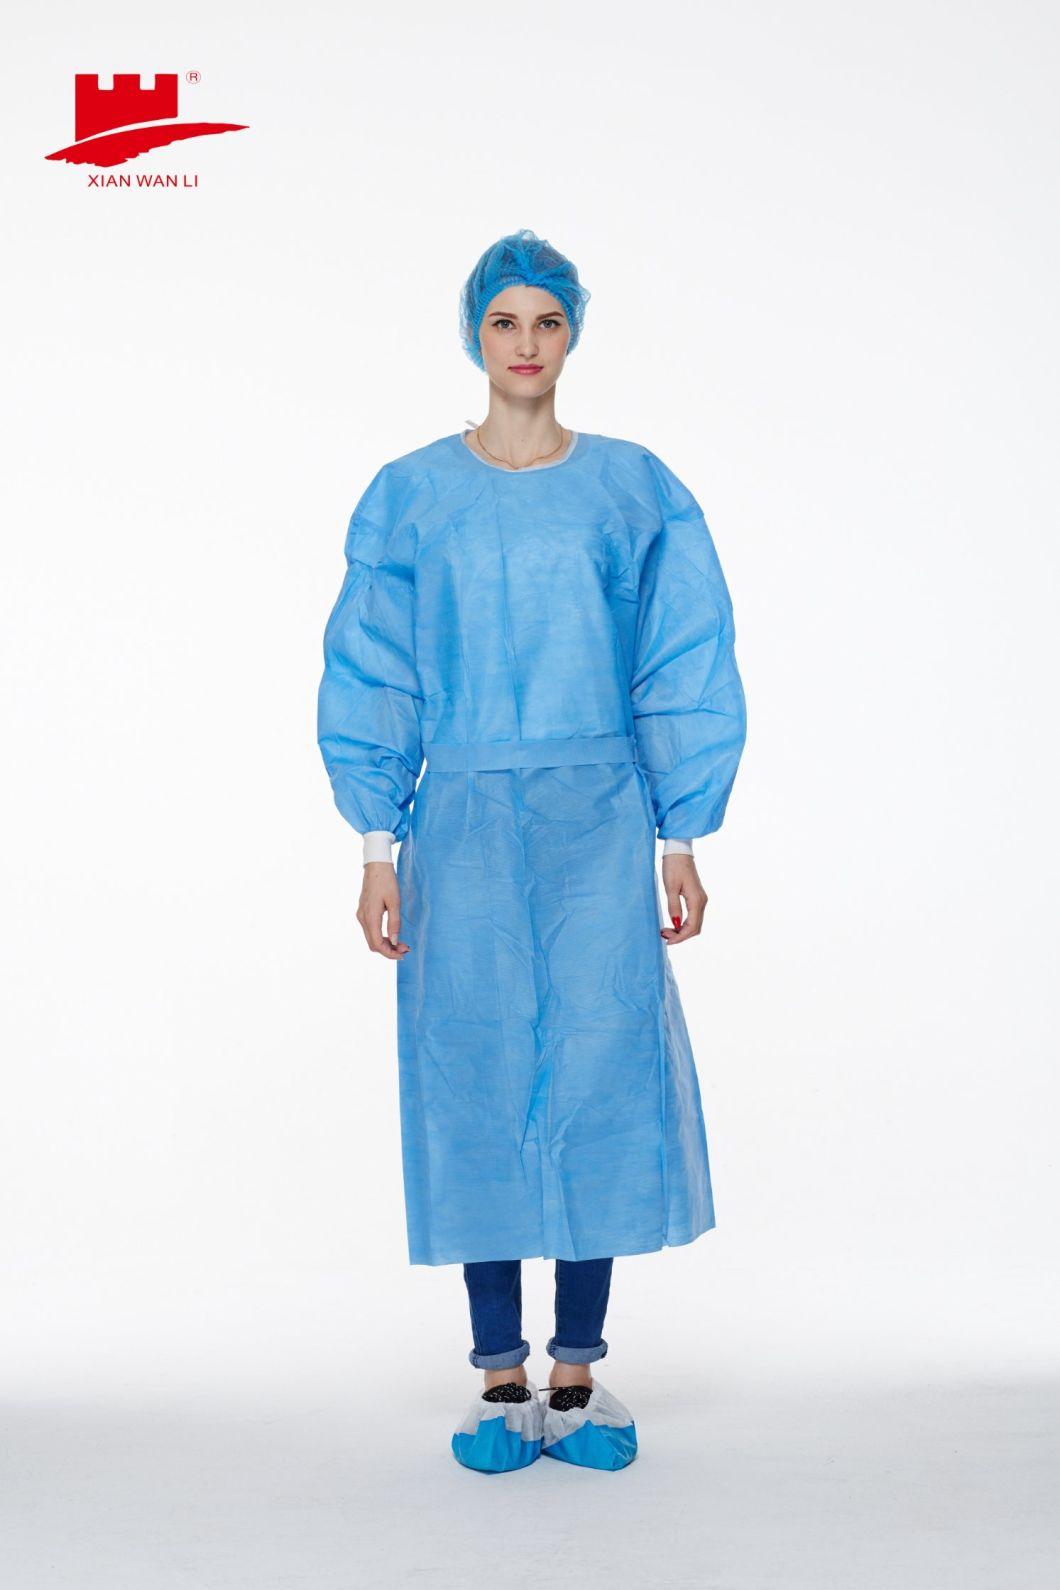 Water Resistant Isolation Gown En13795 Disposable SMS Surgical Gown